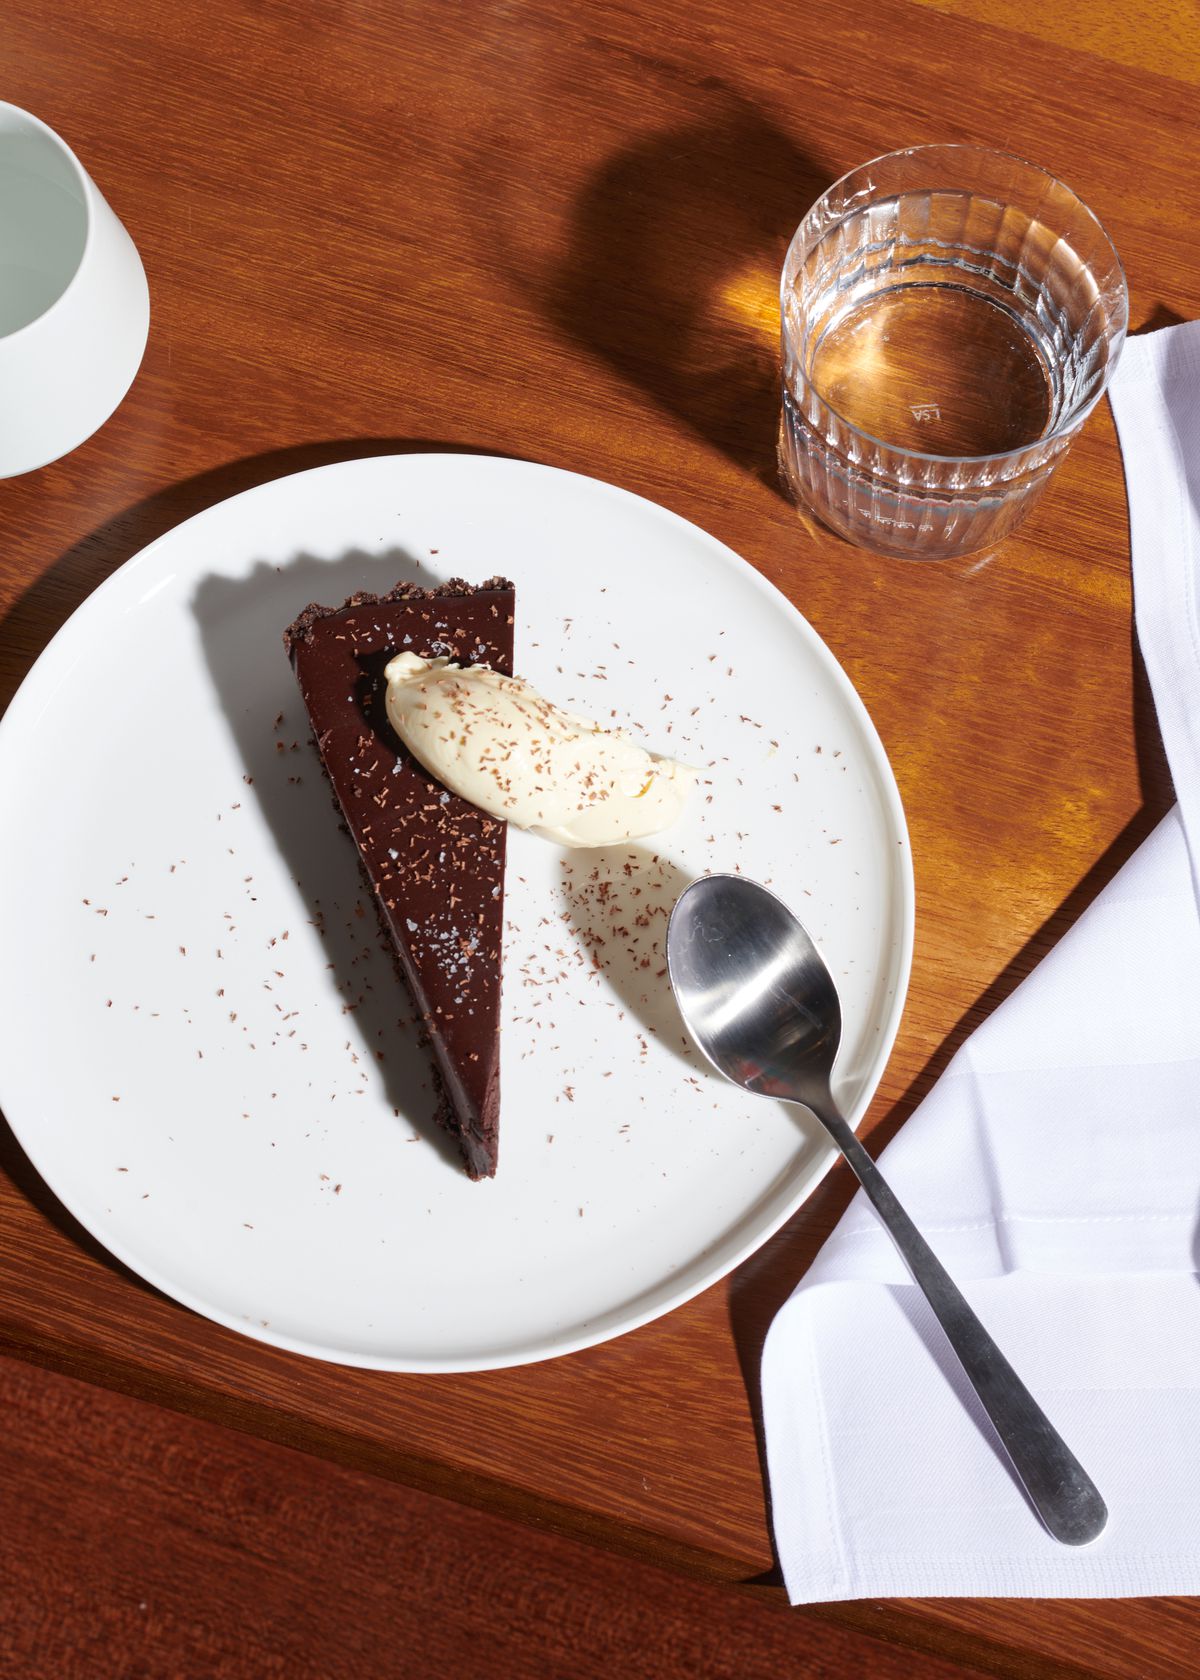 A slice of chocolate pudding pie on a white plate, with a spoon slanted aside it on a wooden table. A water glass sits to the top right.